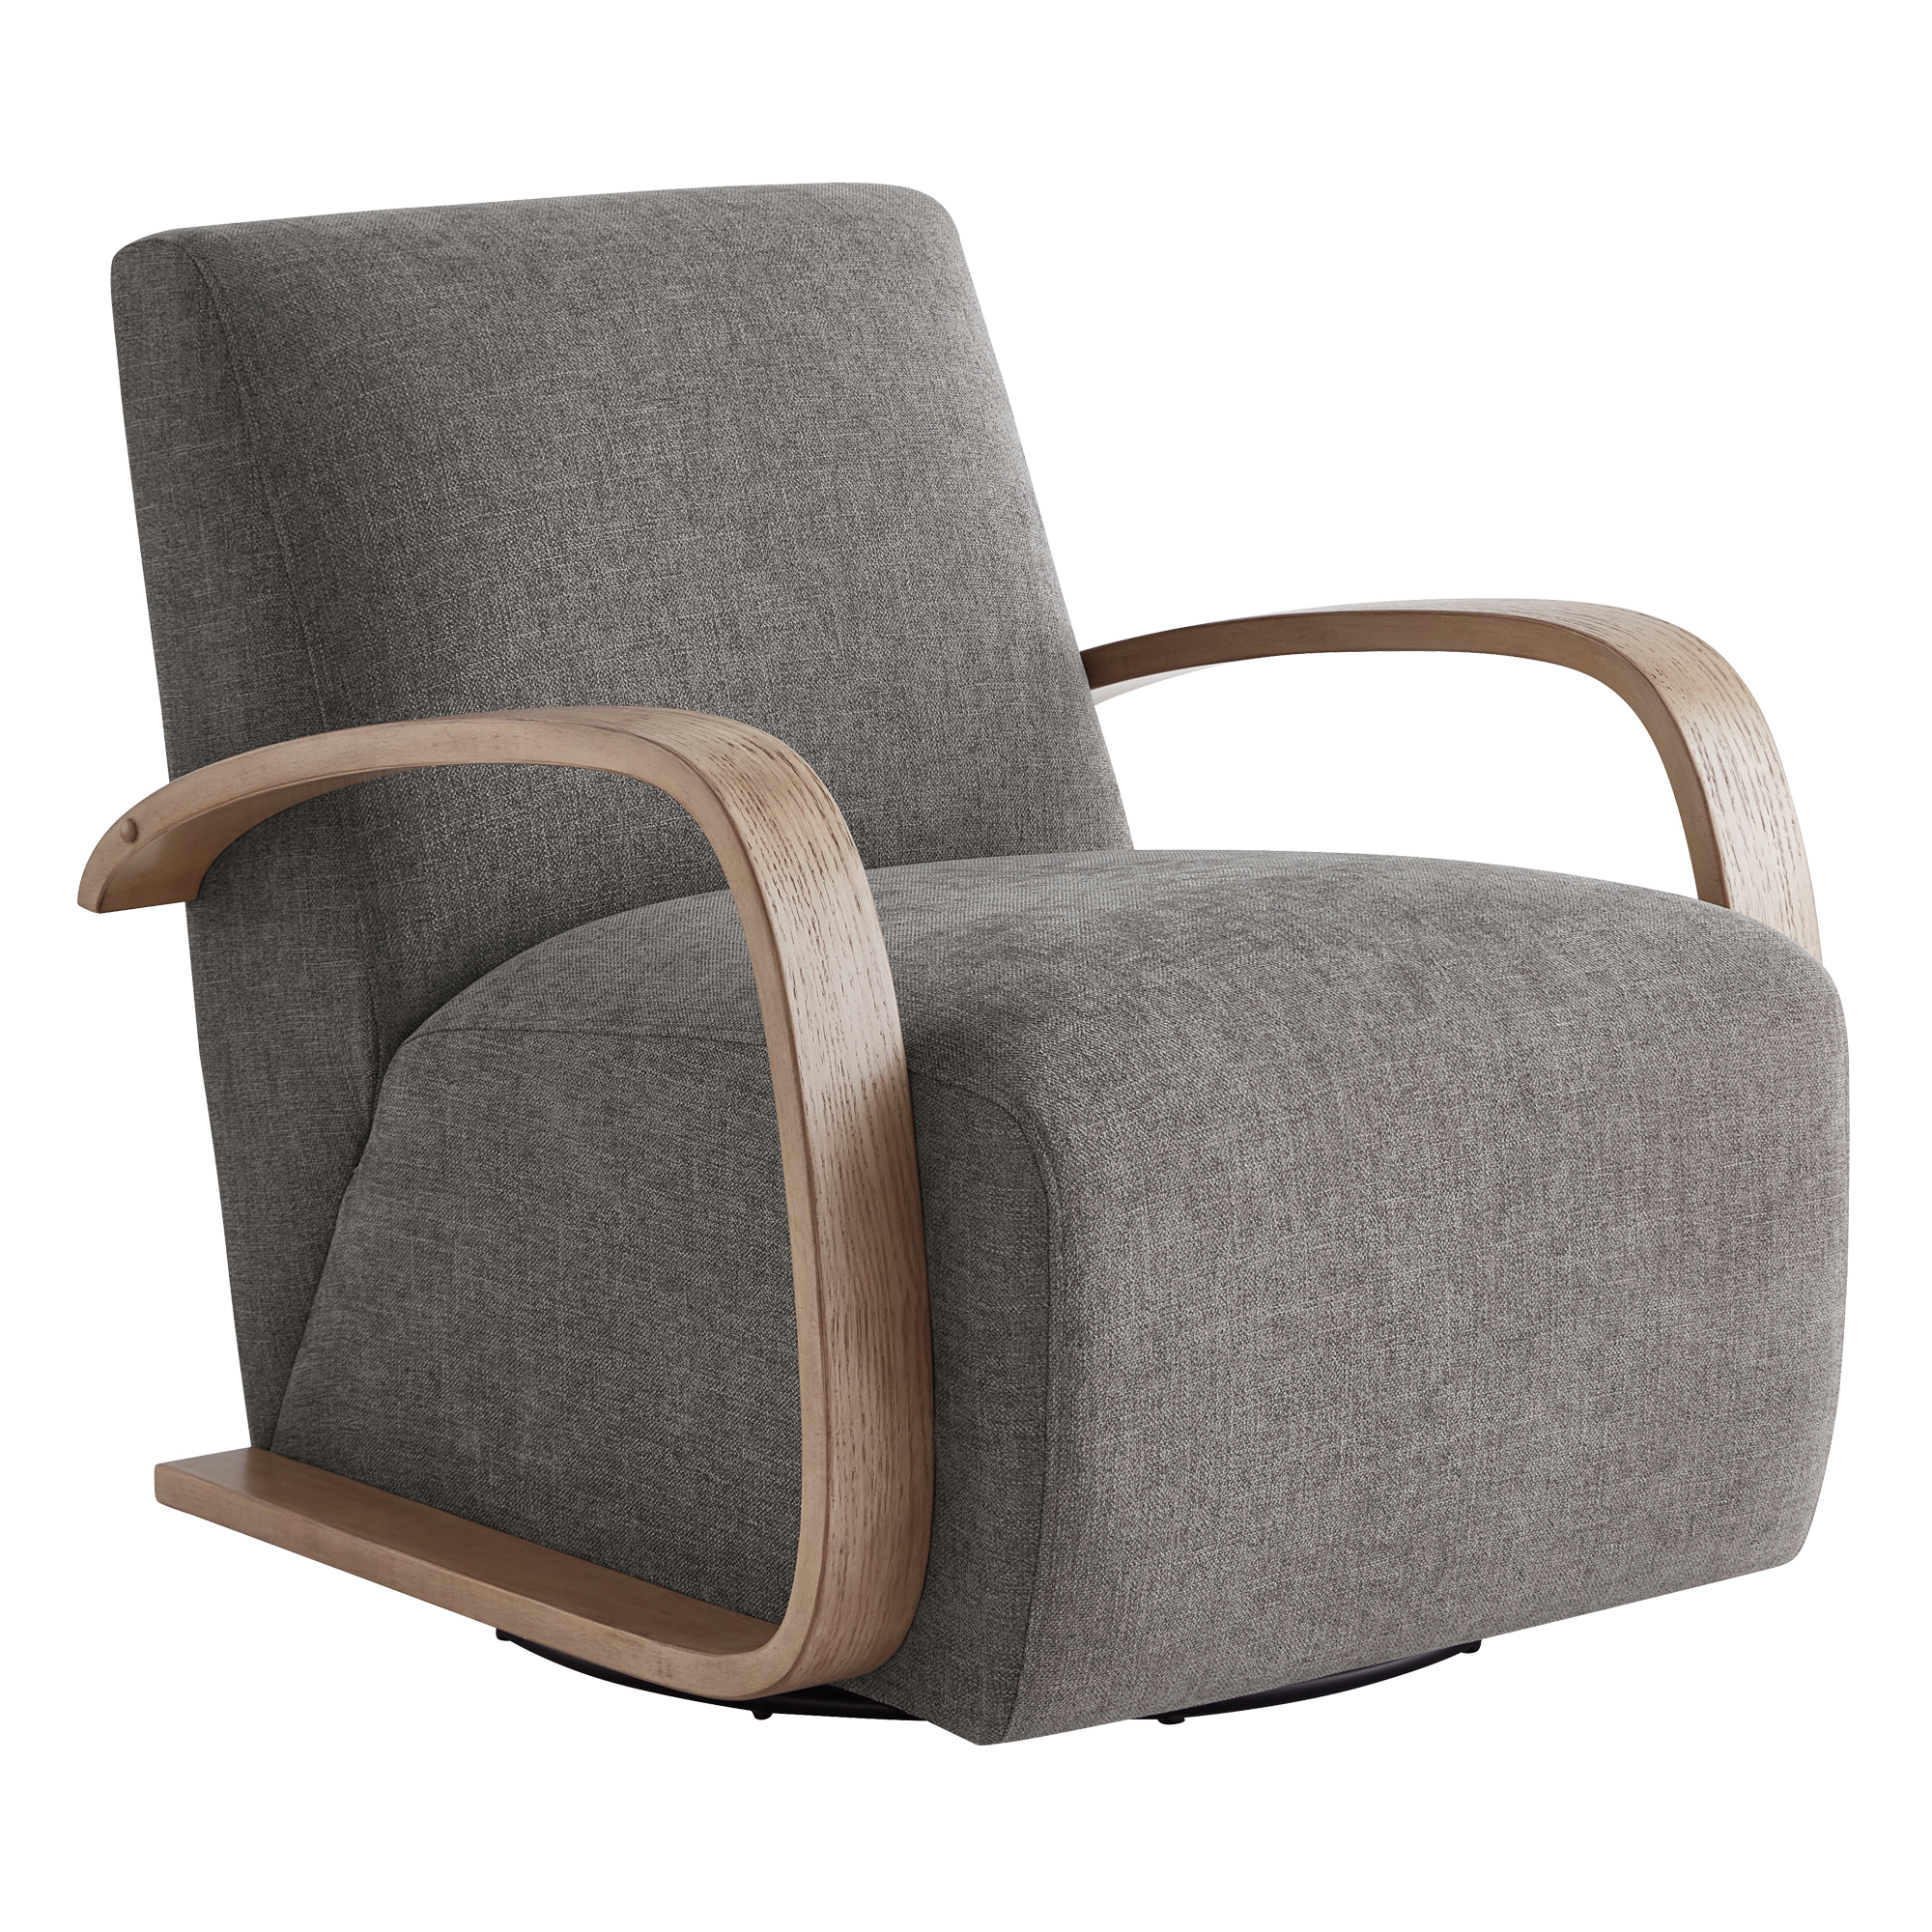 CHITA Swivel Accent Chair with U-shaped Wood Arm for Living Room Beedroom, Dark Gray & Gray Wood - image 3 of 8